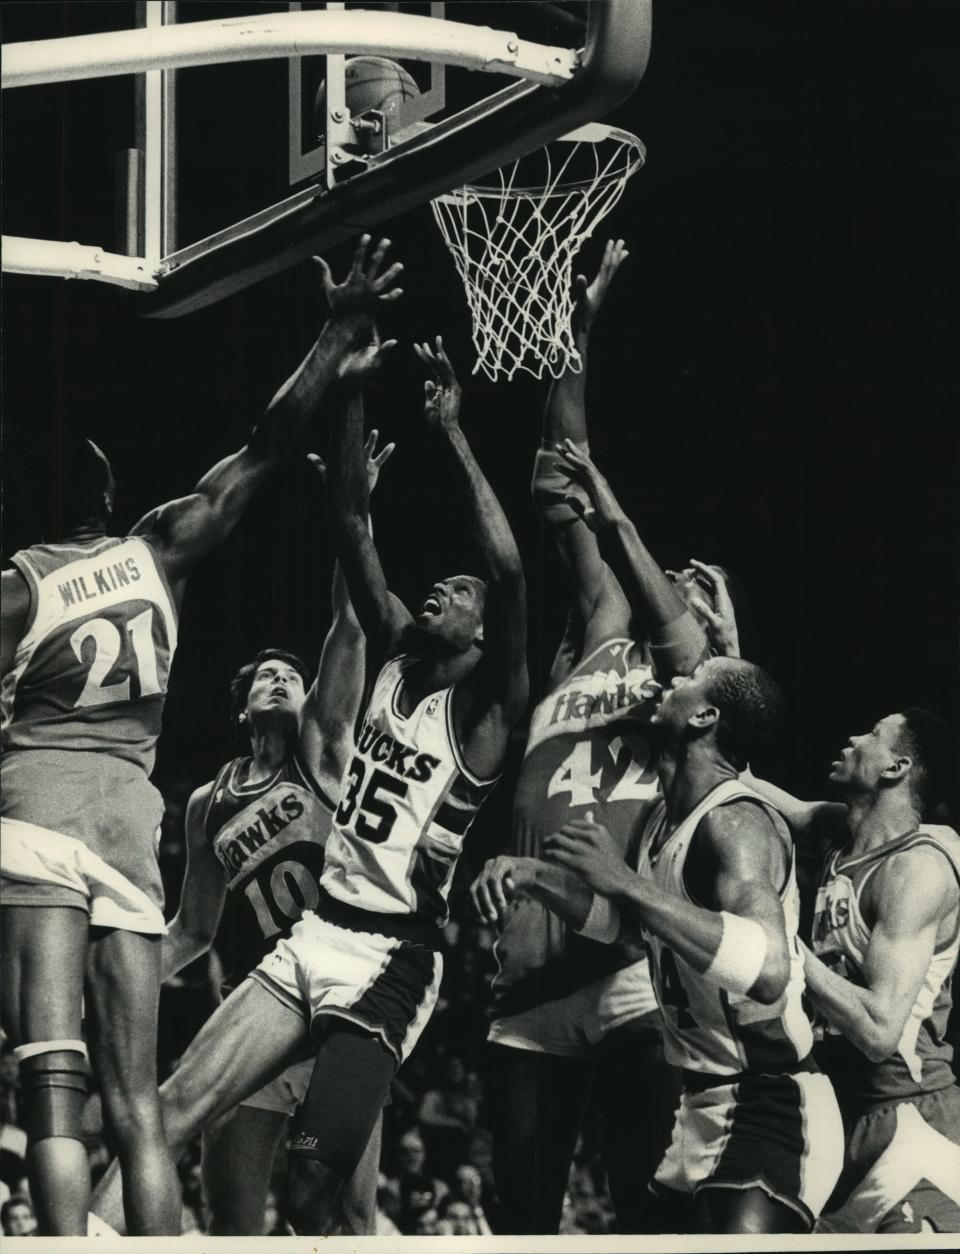 The Bucks' Jerry Reynolds (35) put up a shot in traffic against Atlanta in the 1988 playoffs, surrounded by Hawks defenders Dominique Wilkins (21), Randy Wittman (10)  and Kevin Willis (42).